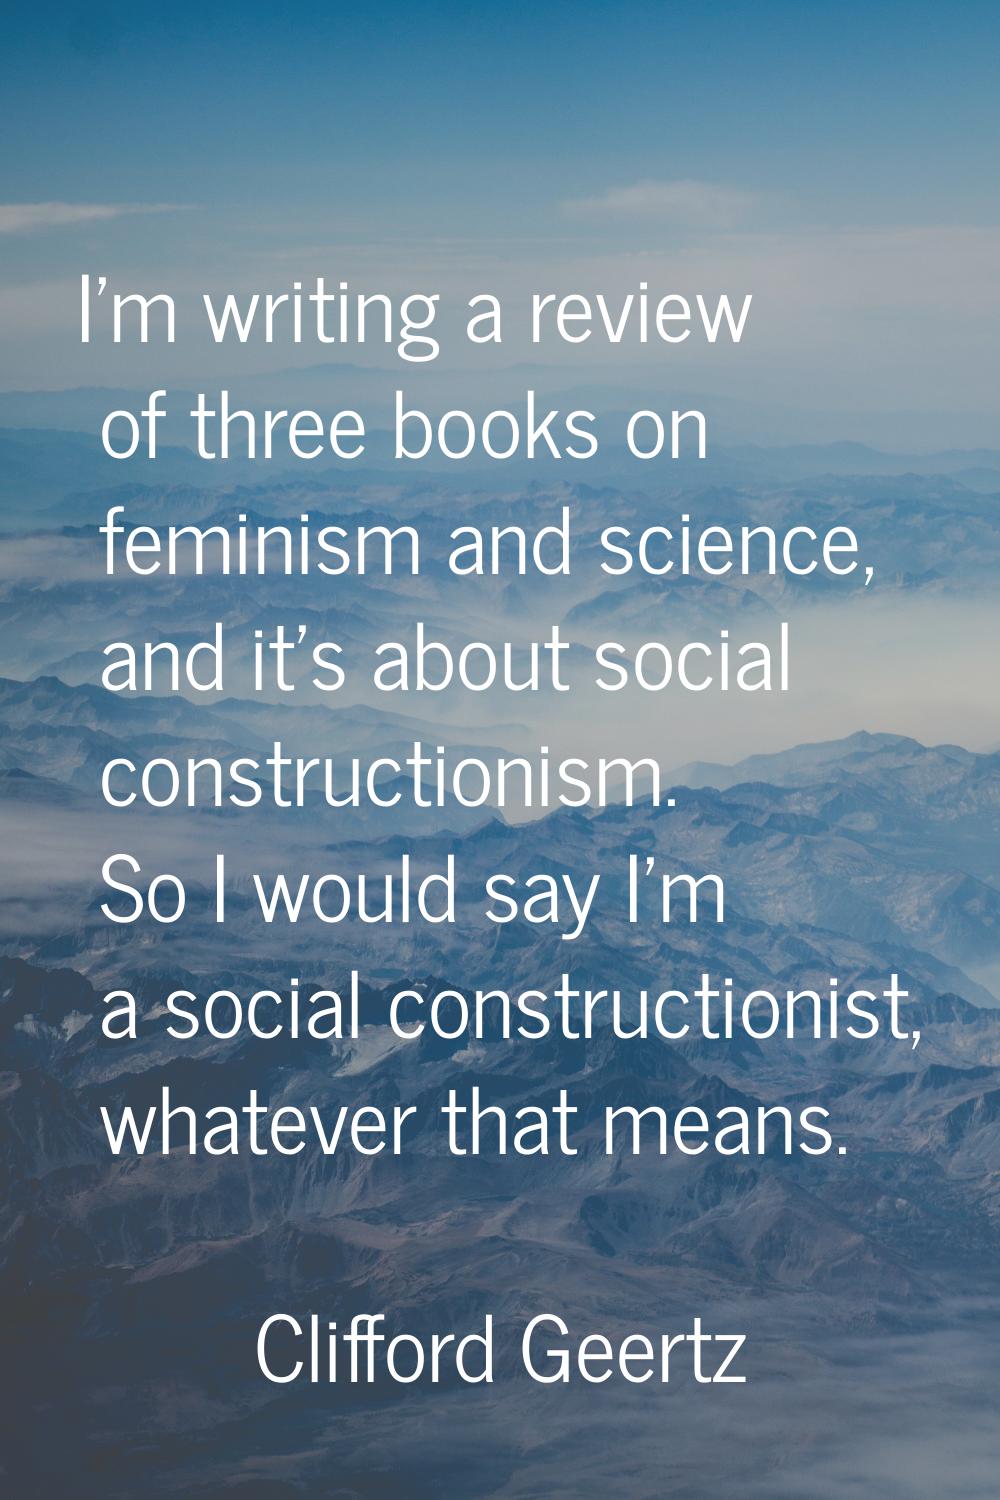 I'm writing a review of three books on feminism and science, and it's about social constructionism.